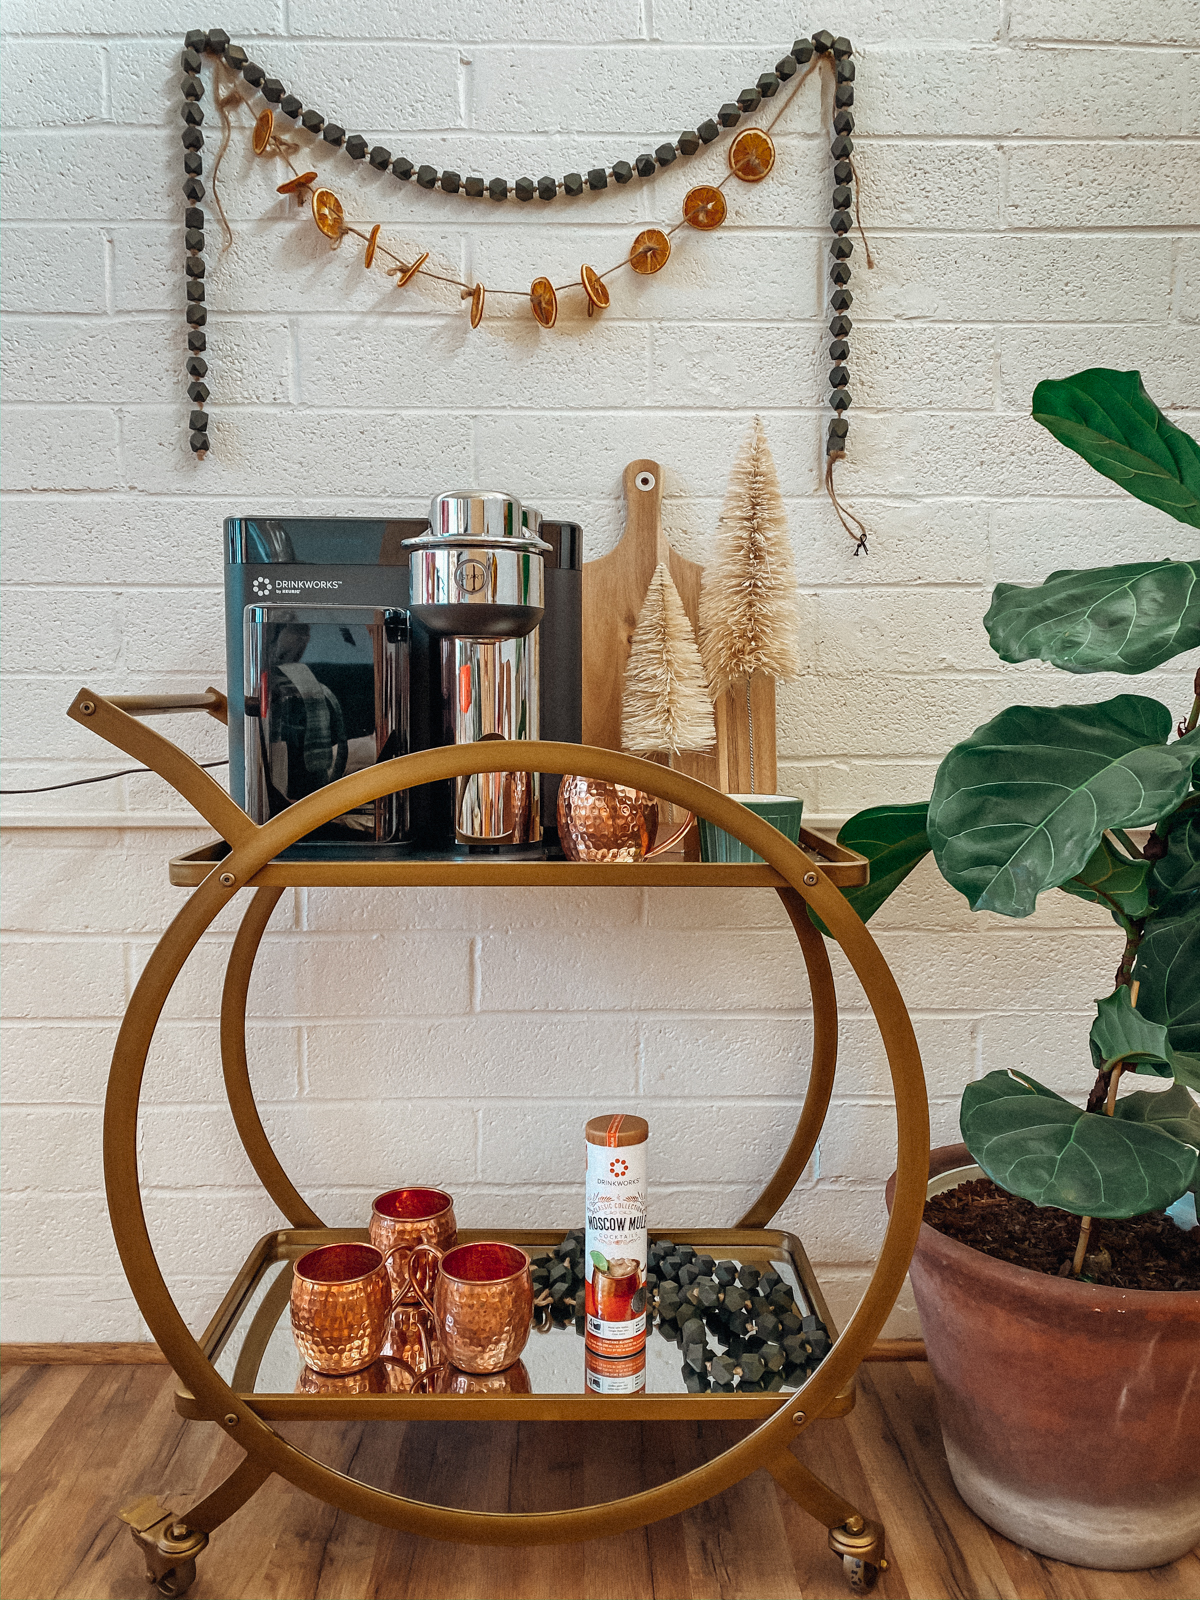 How to Create a Festive Bar Cart with Drinkworks® Home Bar by Keurig® (+Promo Code)